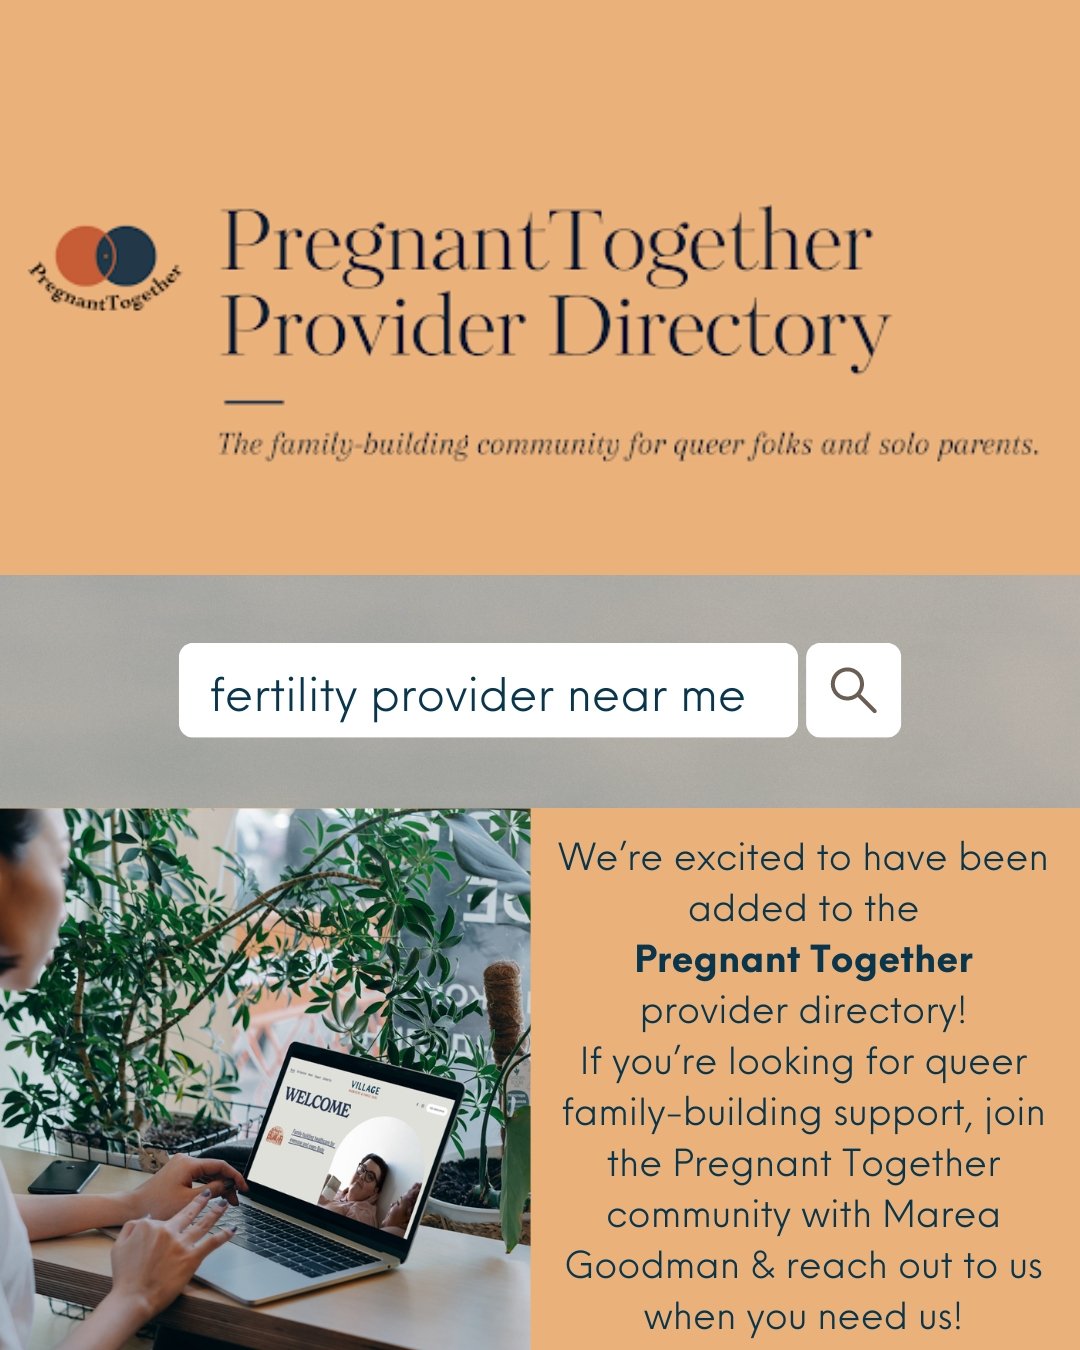 We love the Pregnant Together community and are always recommending Marea Goodman for our clients in search of community and peer support.
🌈
And now we're excited to have been added to their provider directory! 
If you're currently a member or think